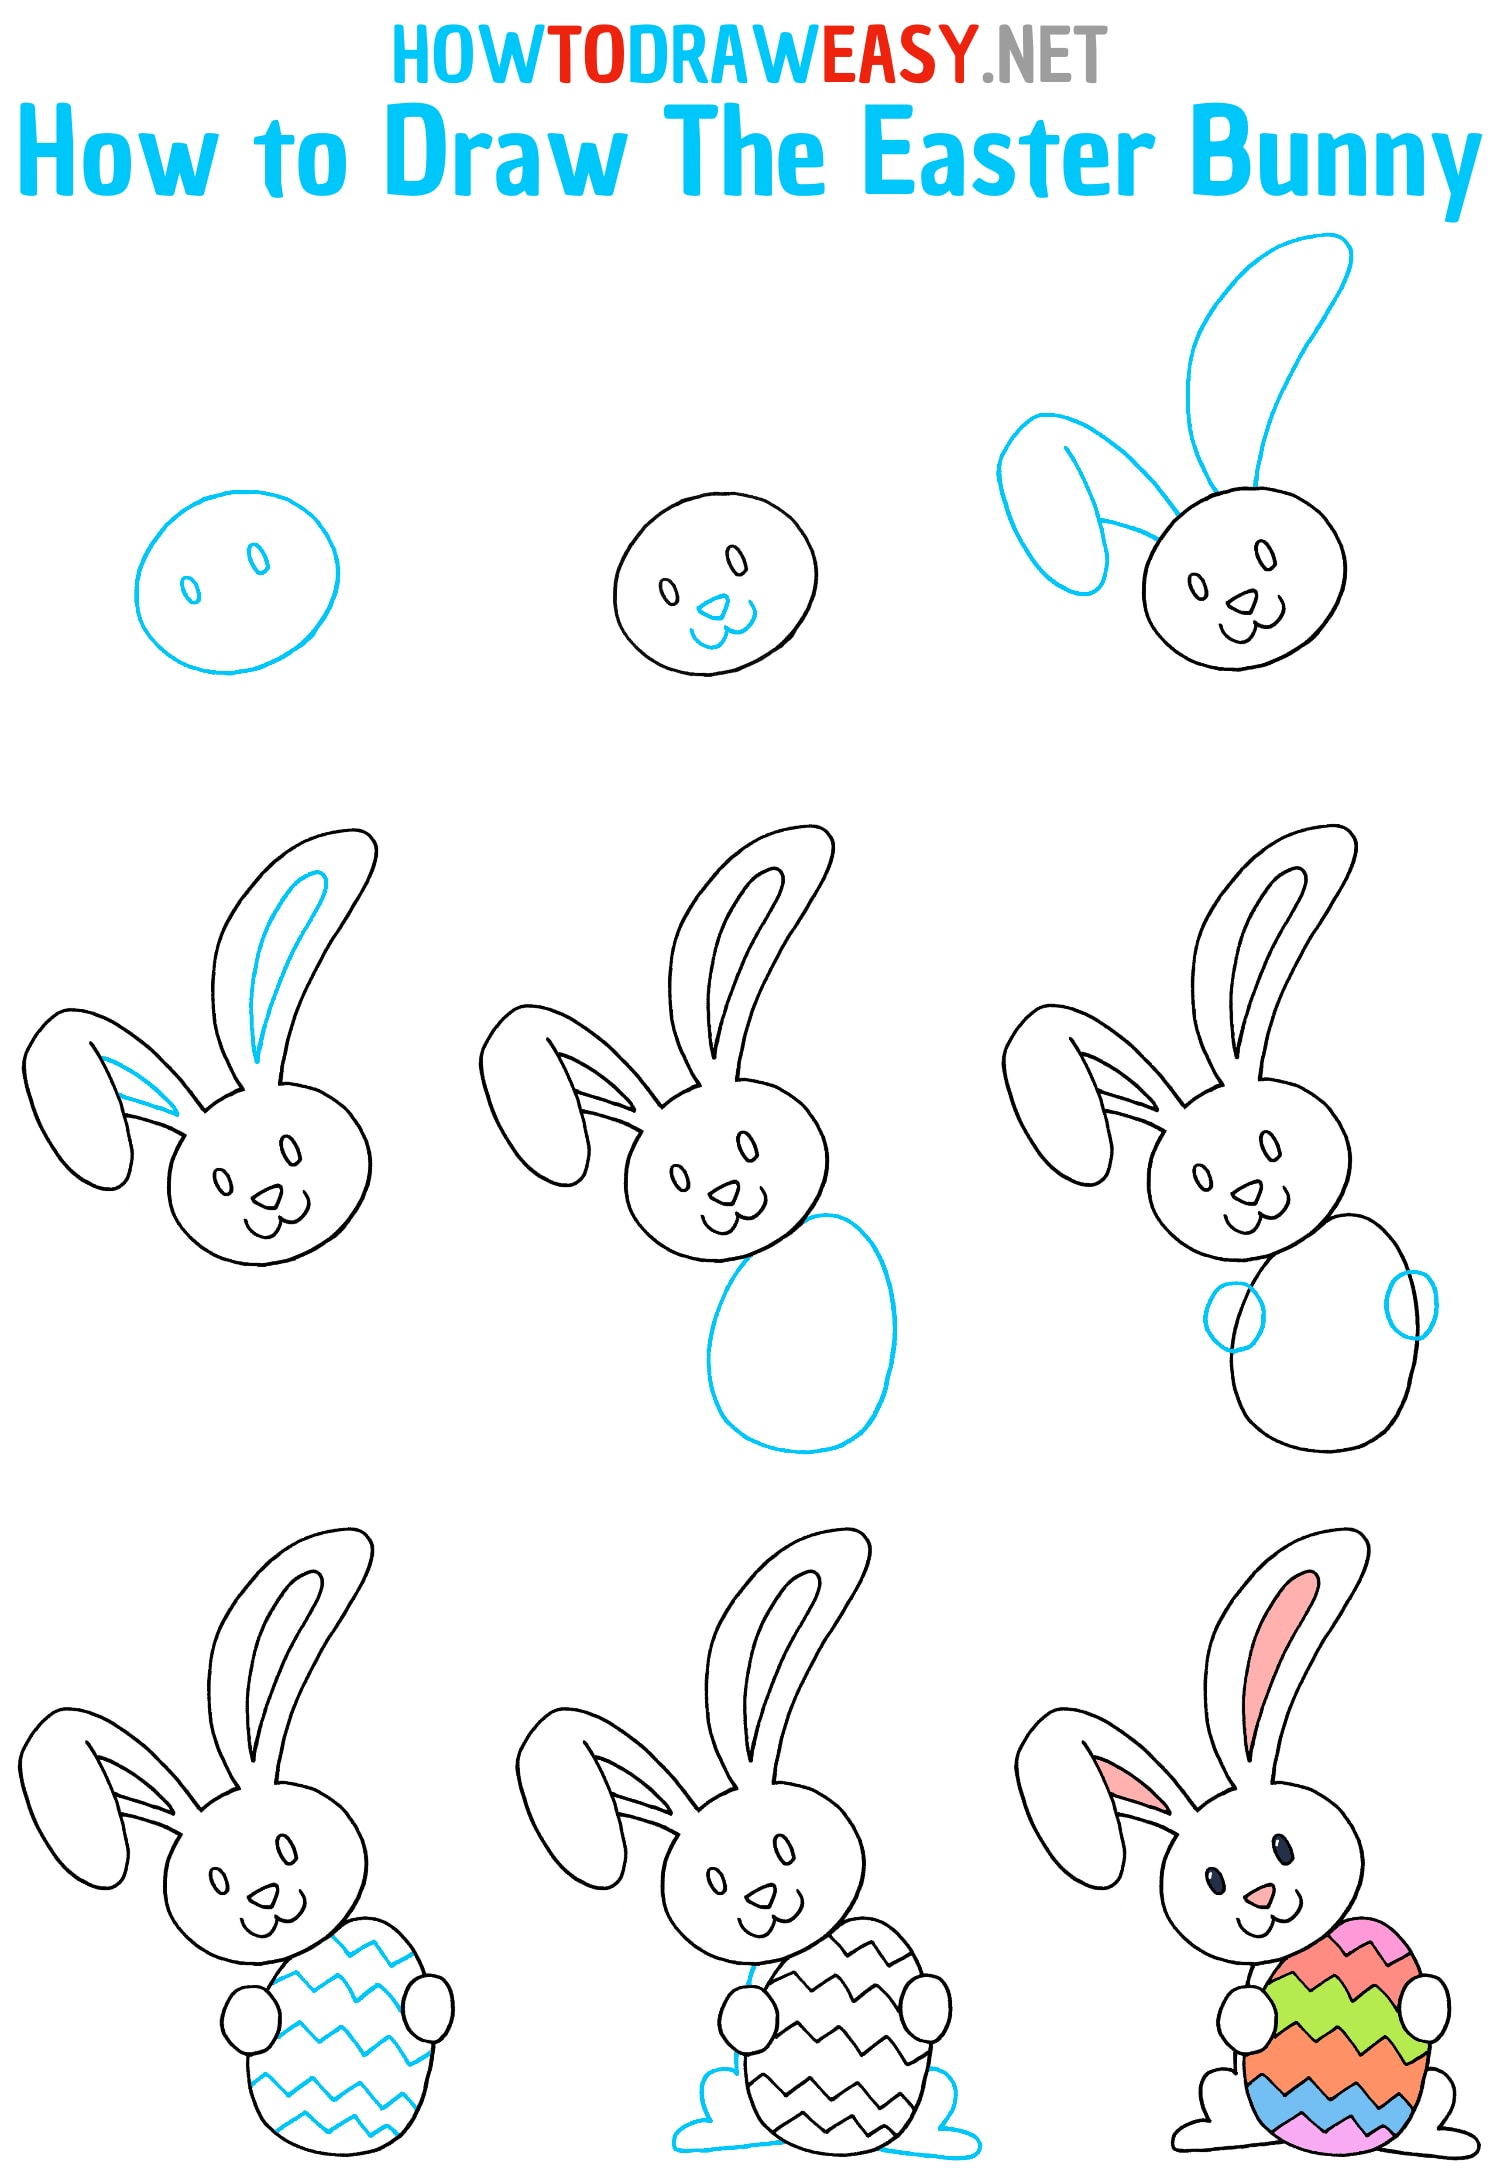 How to Draw The Easter Bunny Step by Step